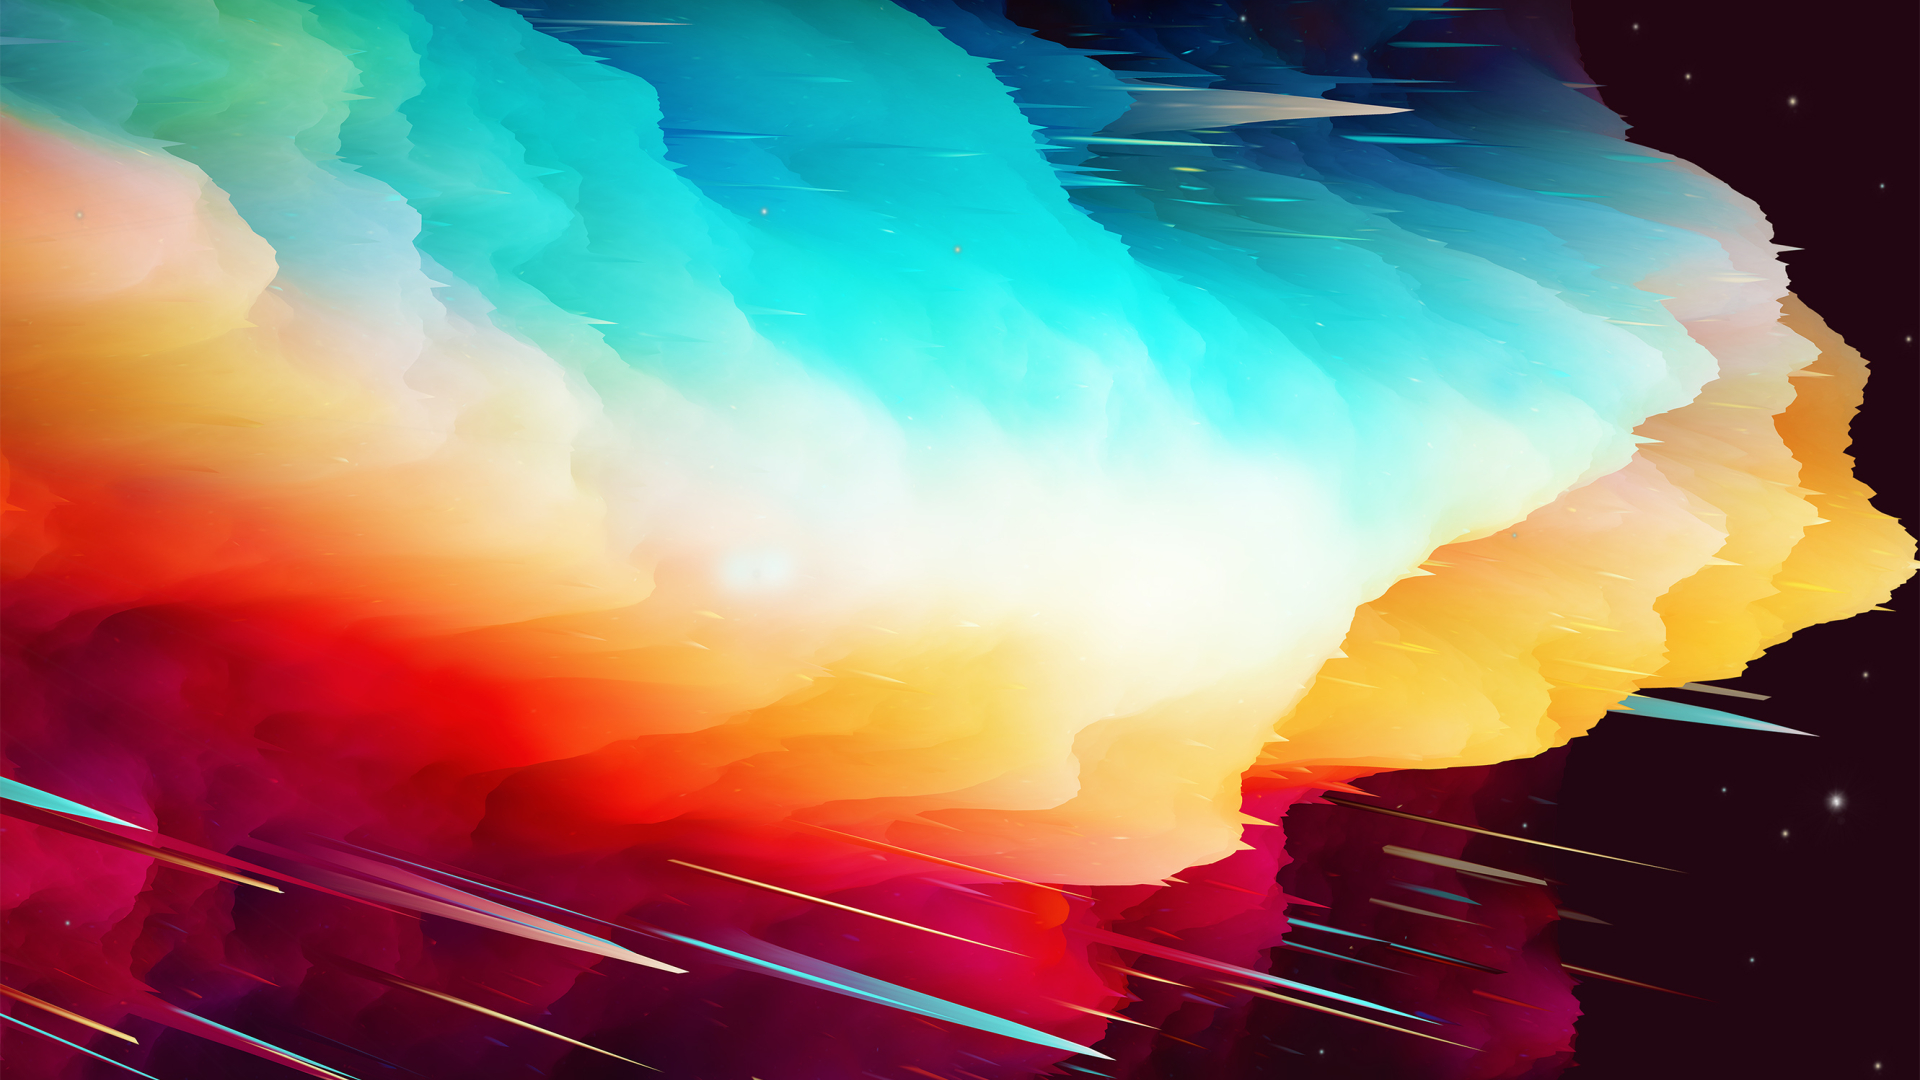 Hd Wallpapers 1080p Widescreen Abstract : Painting Eagle Simple ...